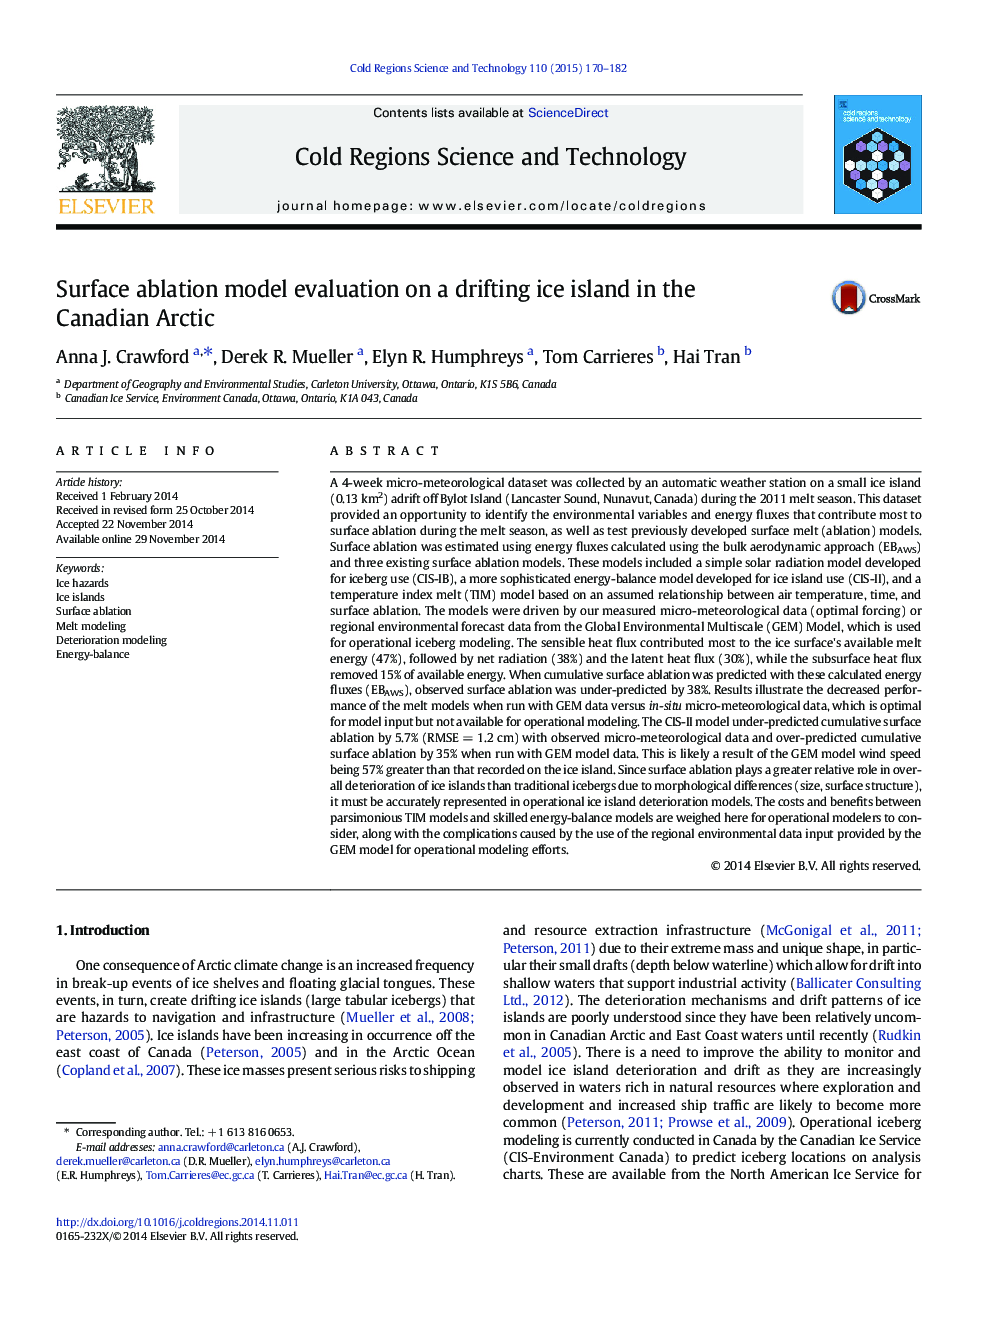 Surface ablation model evaluation on a drifting ice island in the Canadian Arctic